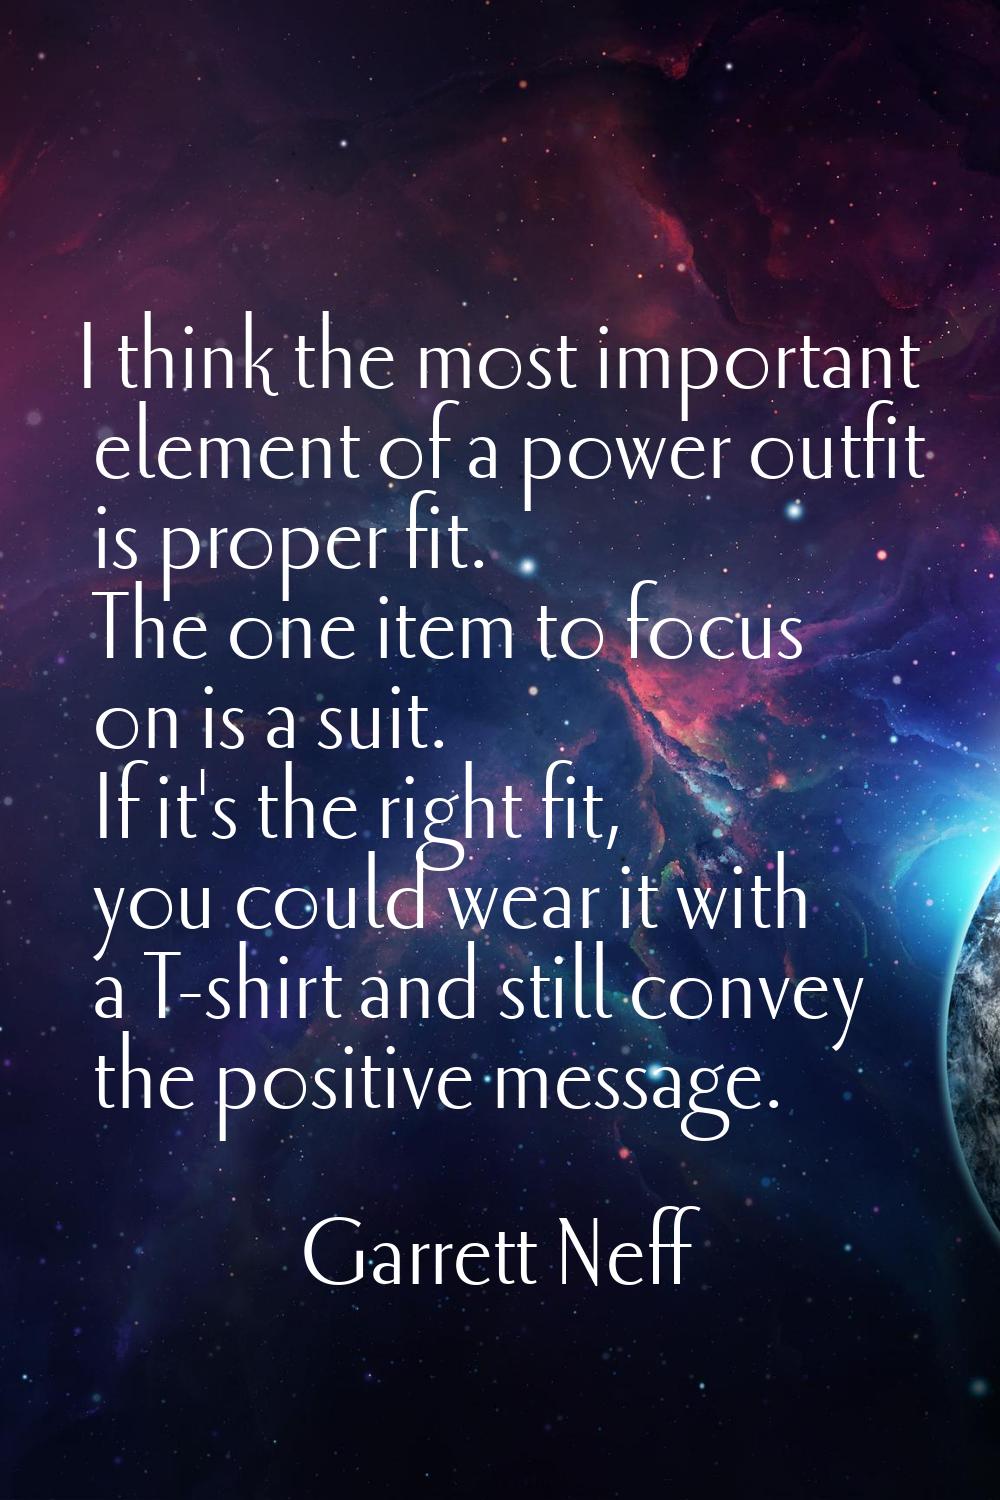 I think the most important element of a power outfit is proper fit. The one item to focus on is a s